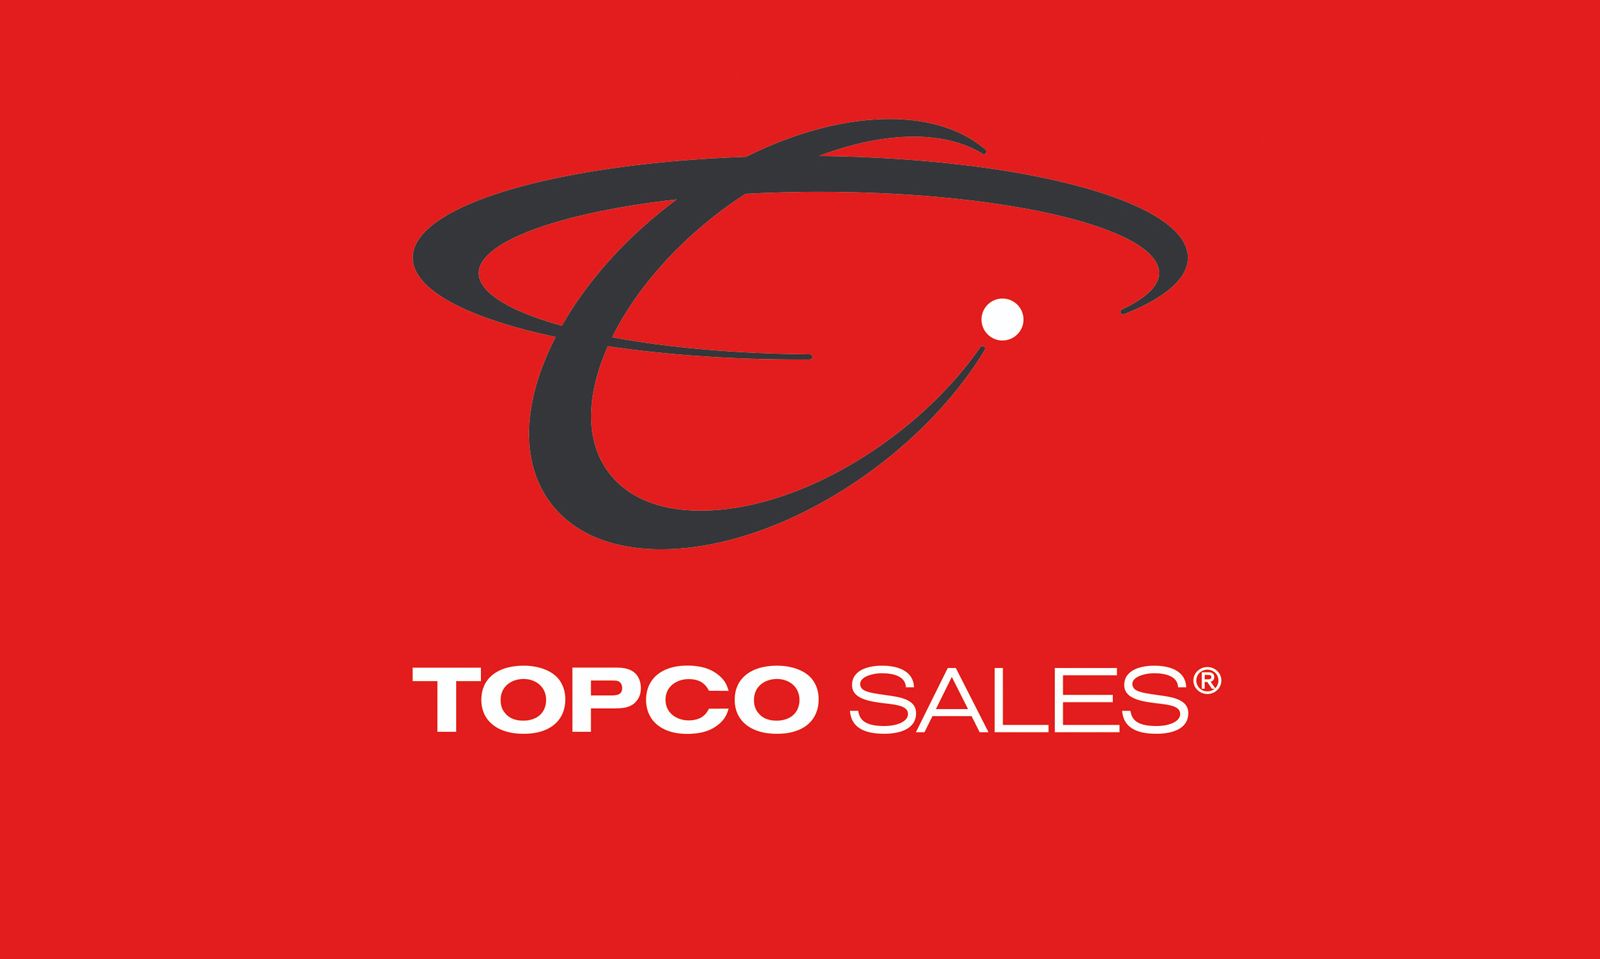 Topco Sales Launches Winter 2012 Catalog at ANME